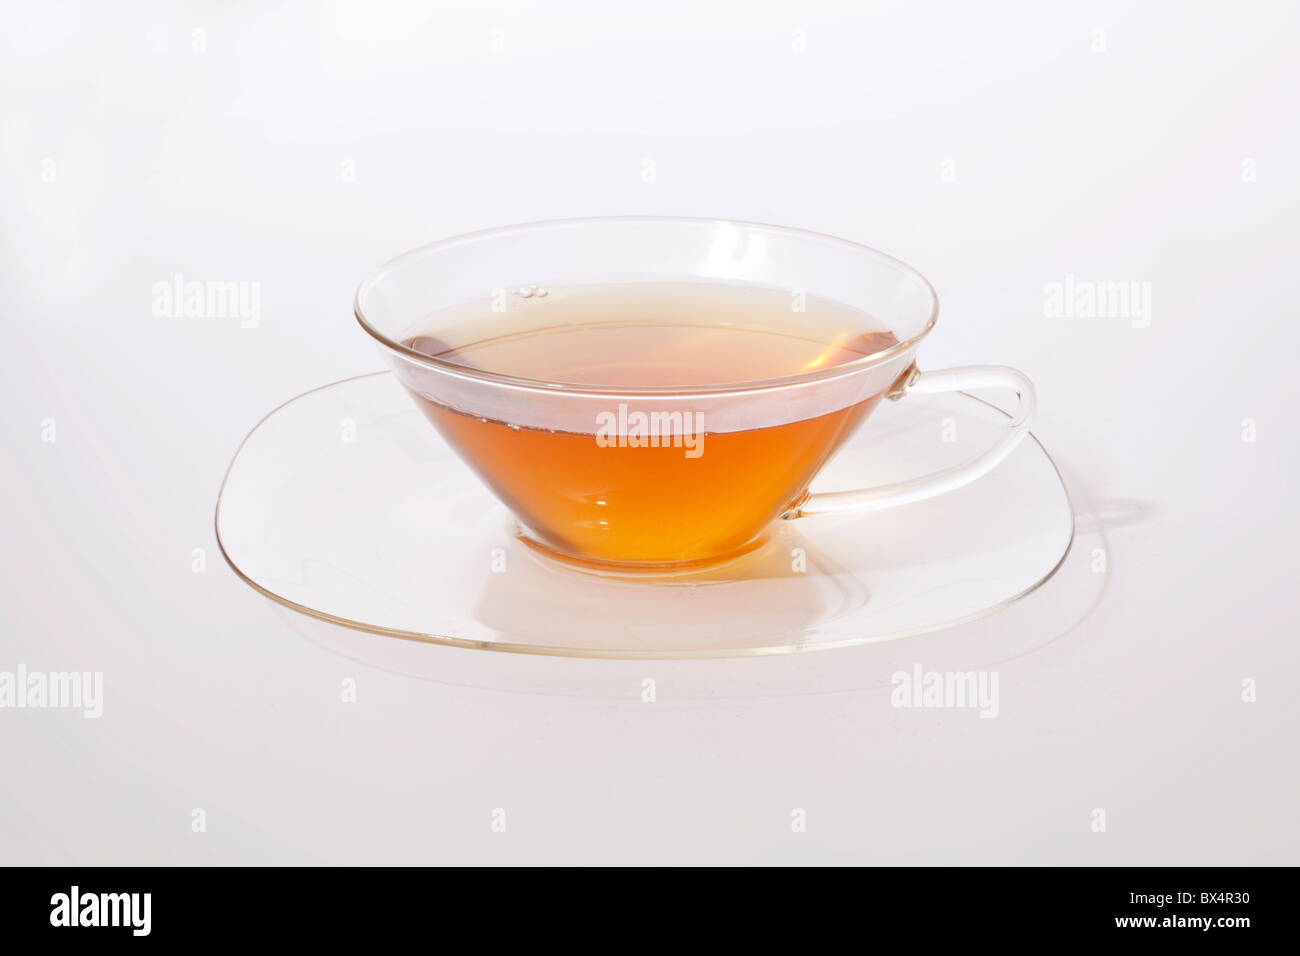 cup of tea in transparent space age glass cup and saucer Stock Photo